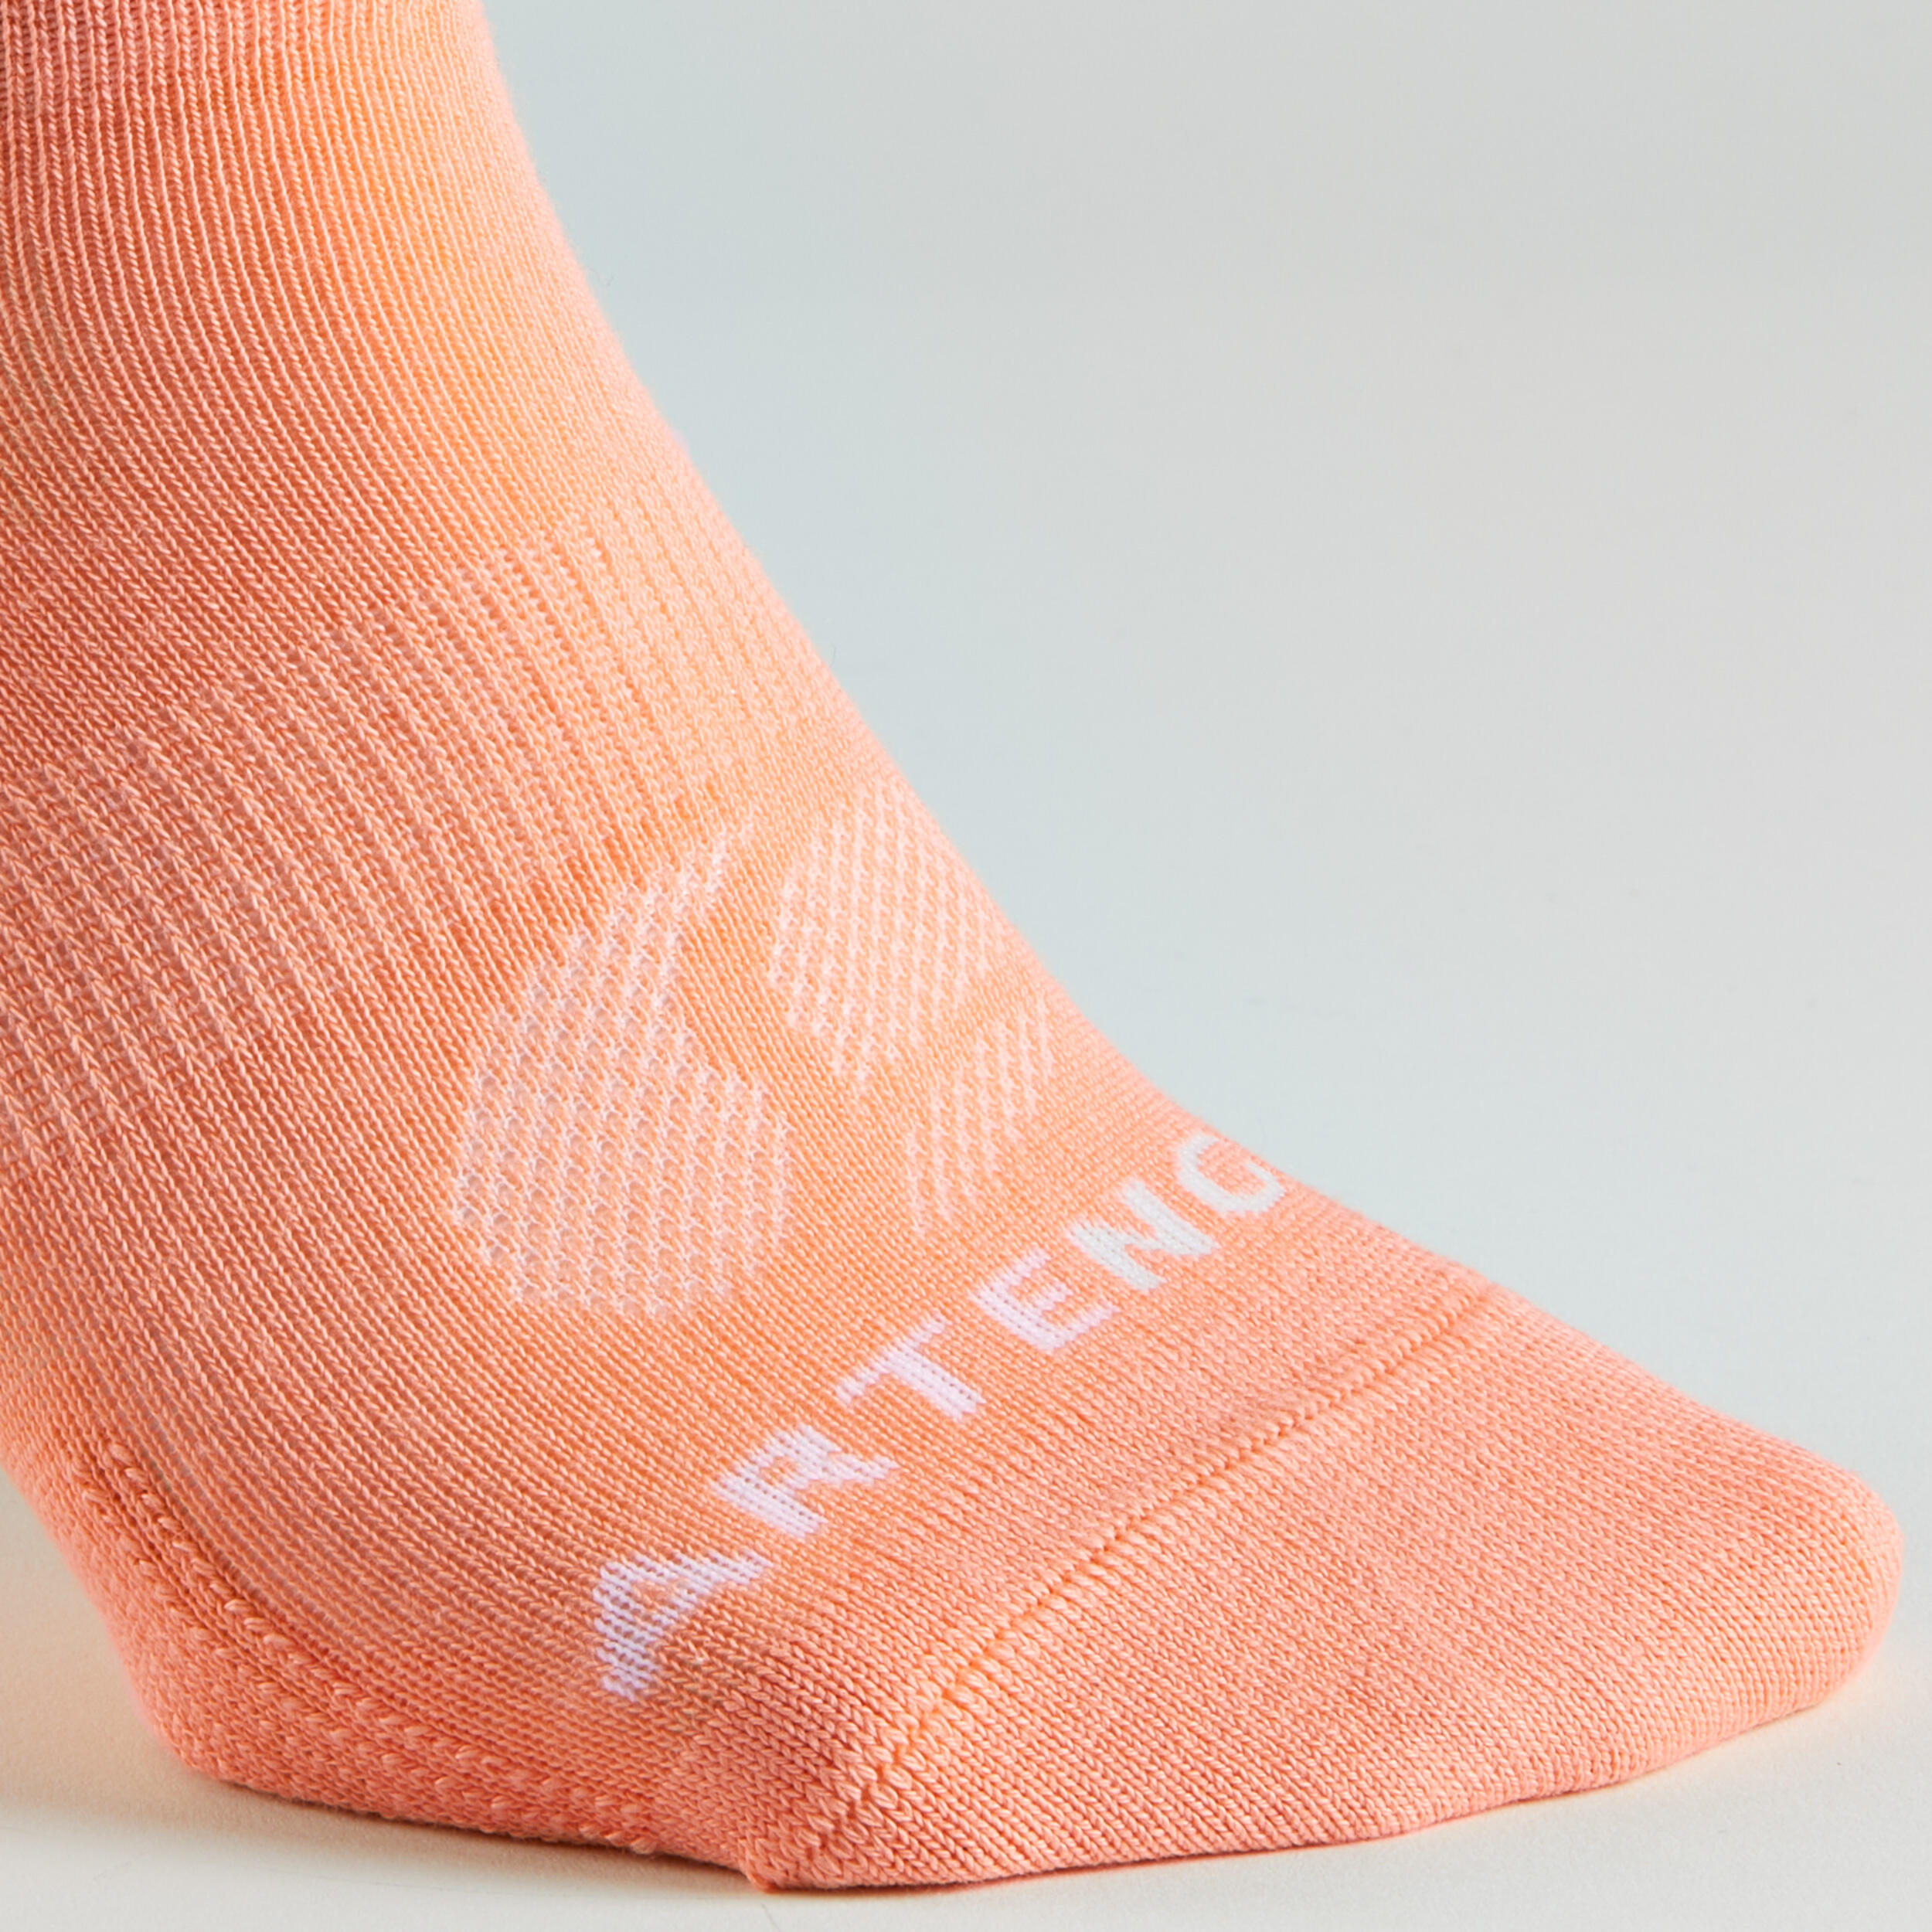 Low Sports Socks RS 160 Tri-Pack - Apricot/Pink/Navy 5/14